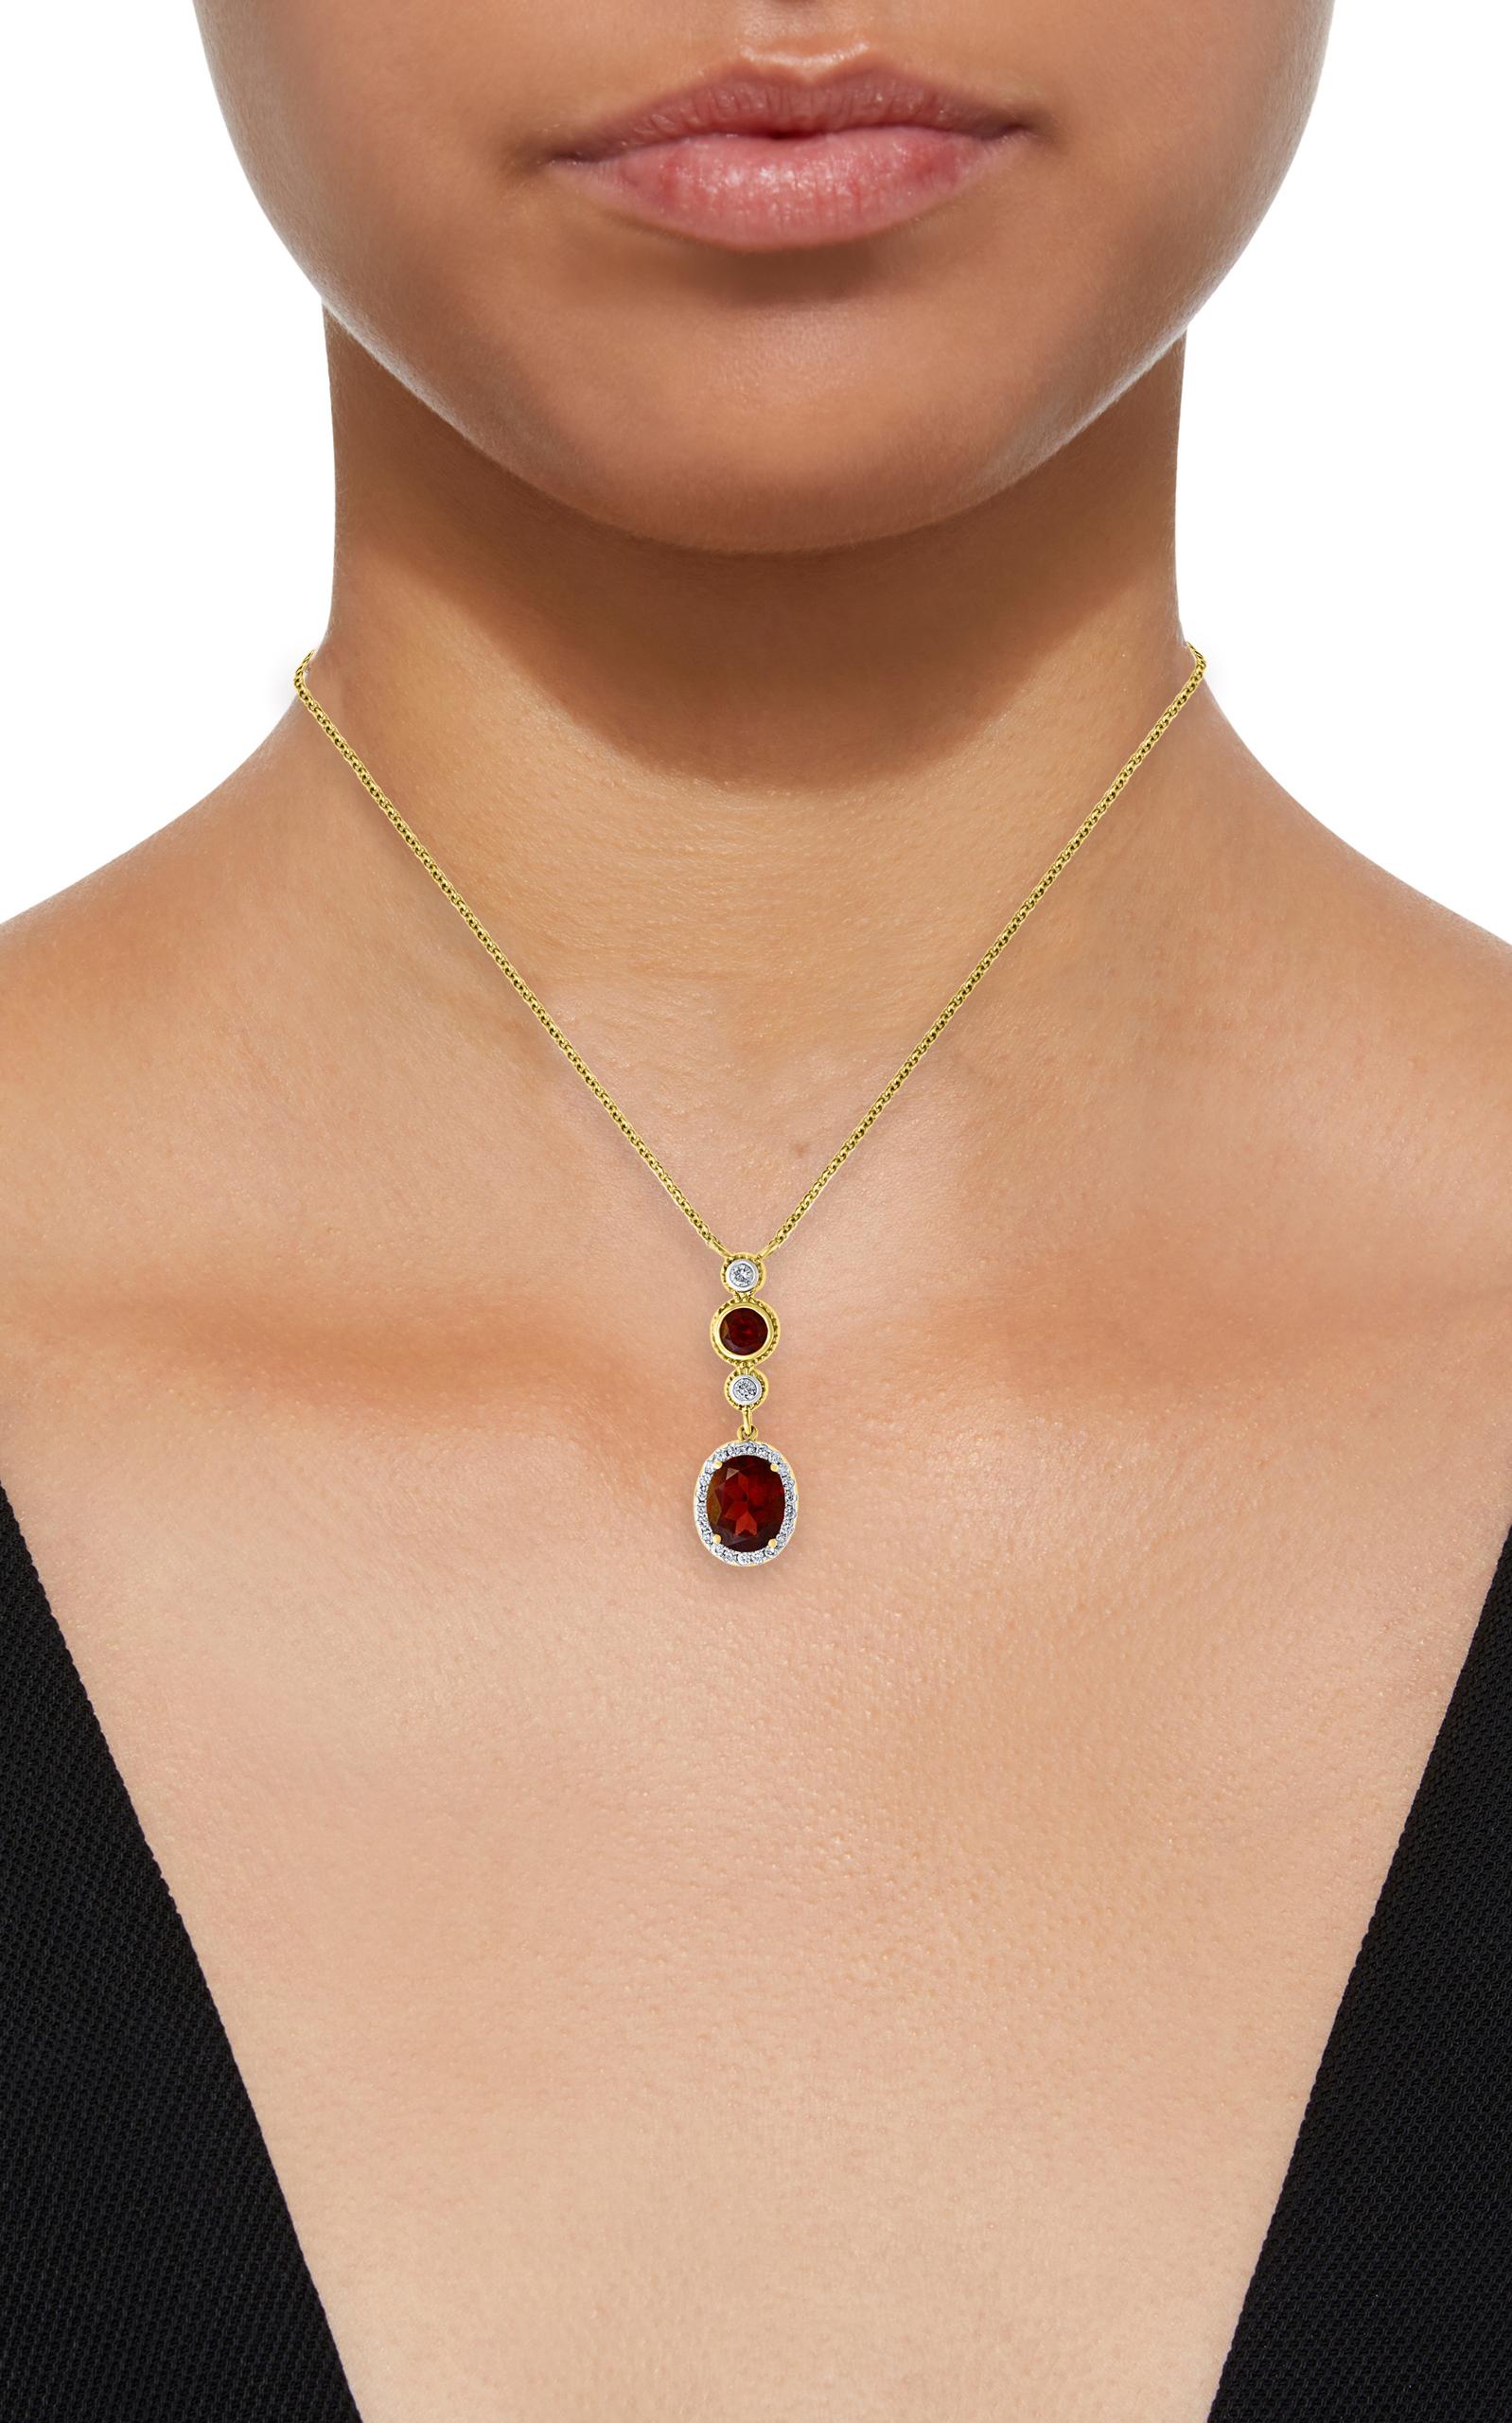 Oval Cut 6 Carat Oval Shape Garnet and 0.6 Carat Diamond Necklace in 14 Karat Yellow Gold For Sale